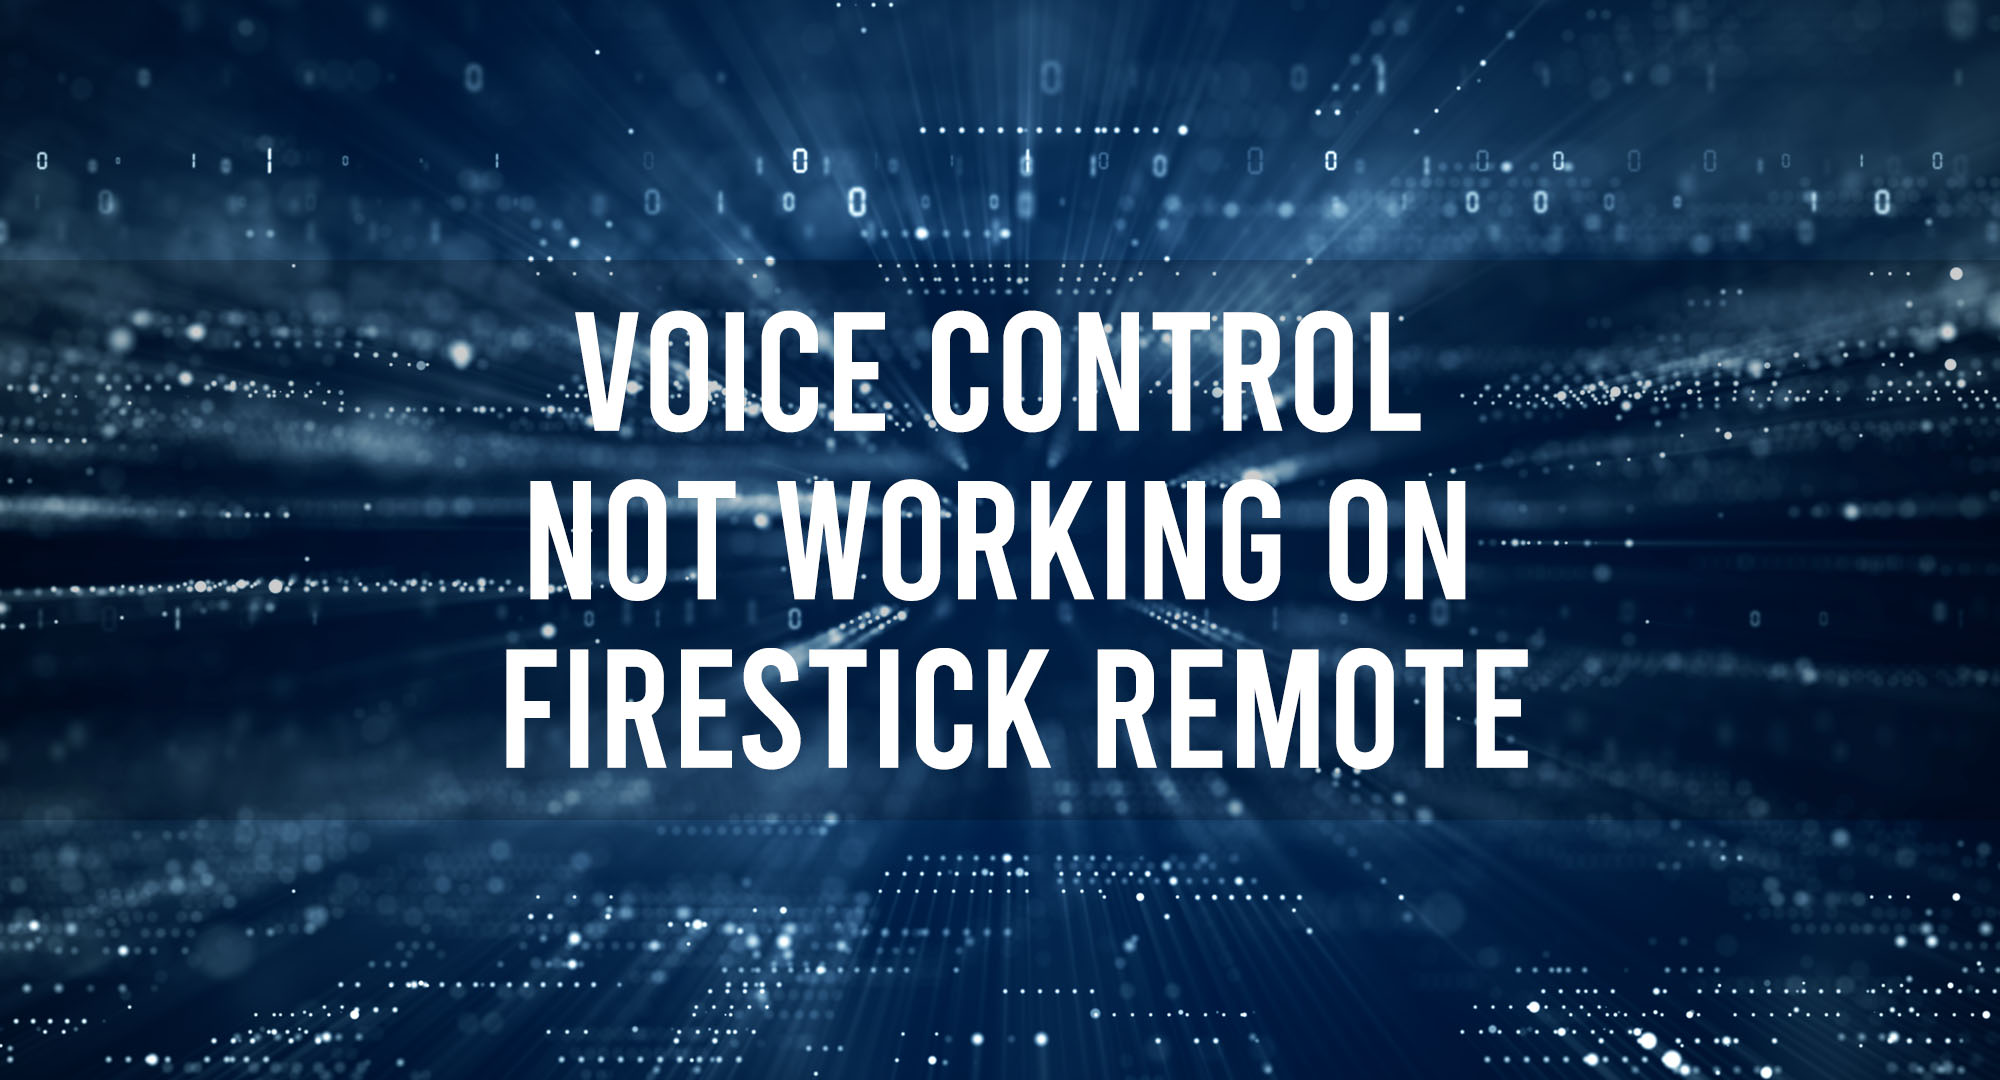 Voice Control Not Working on Firestick Remote